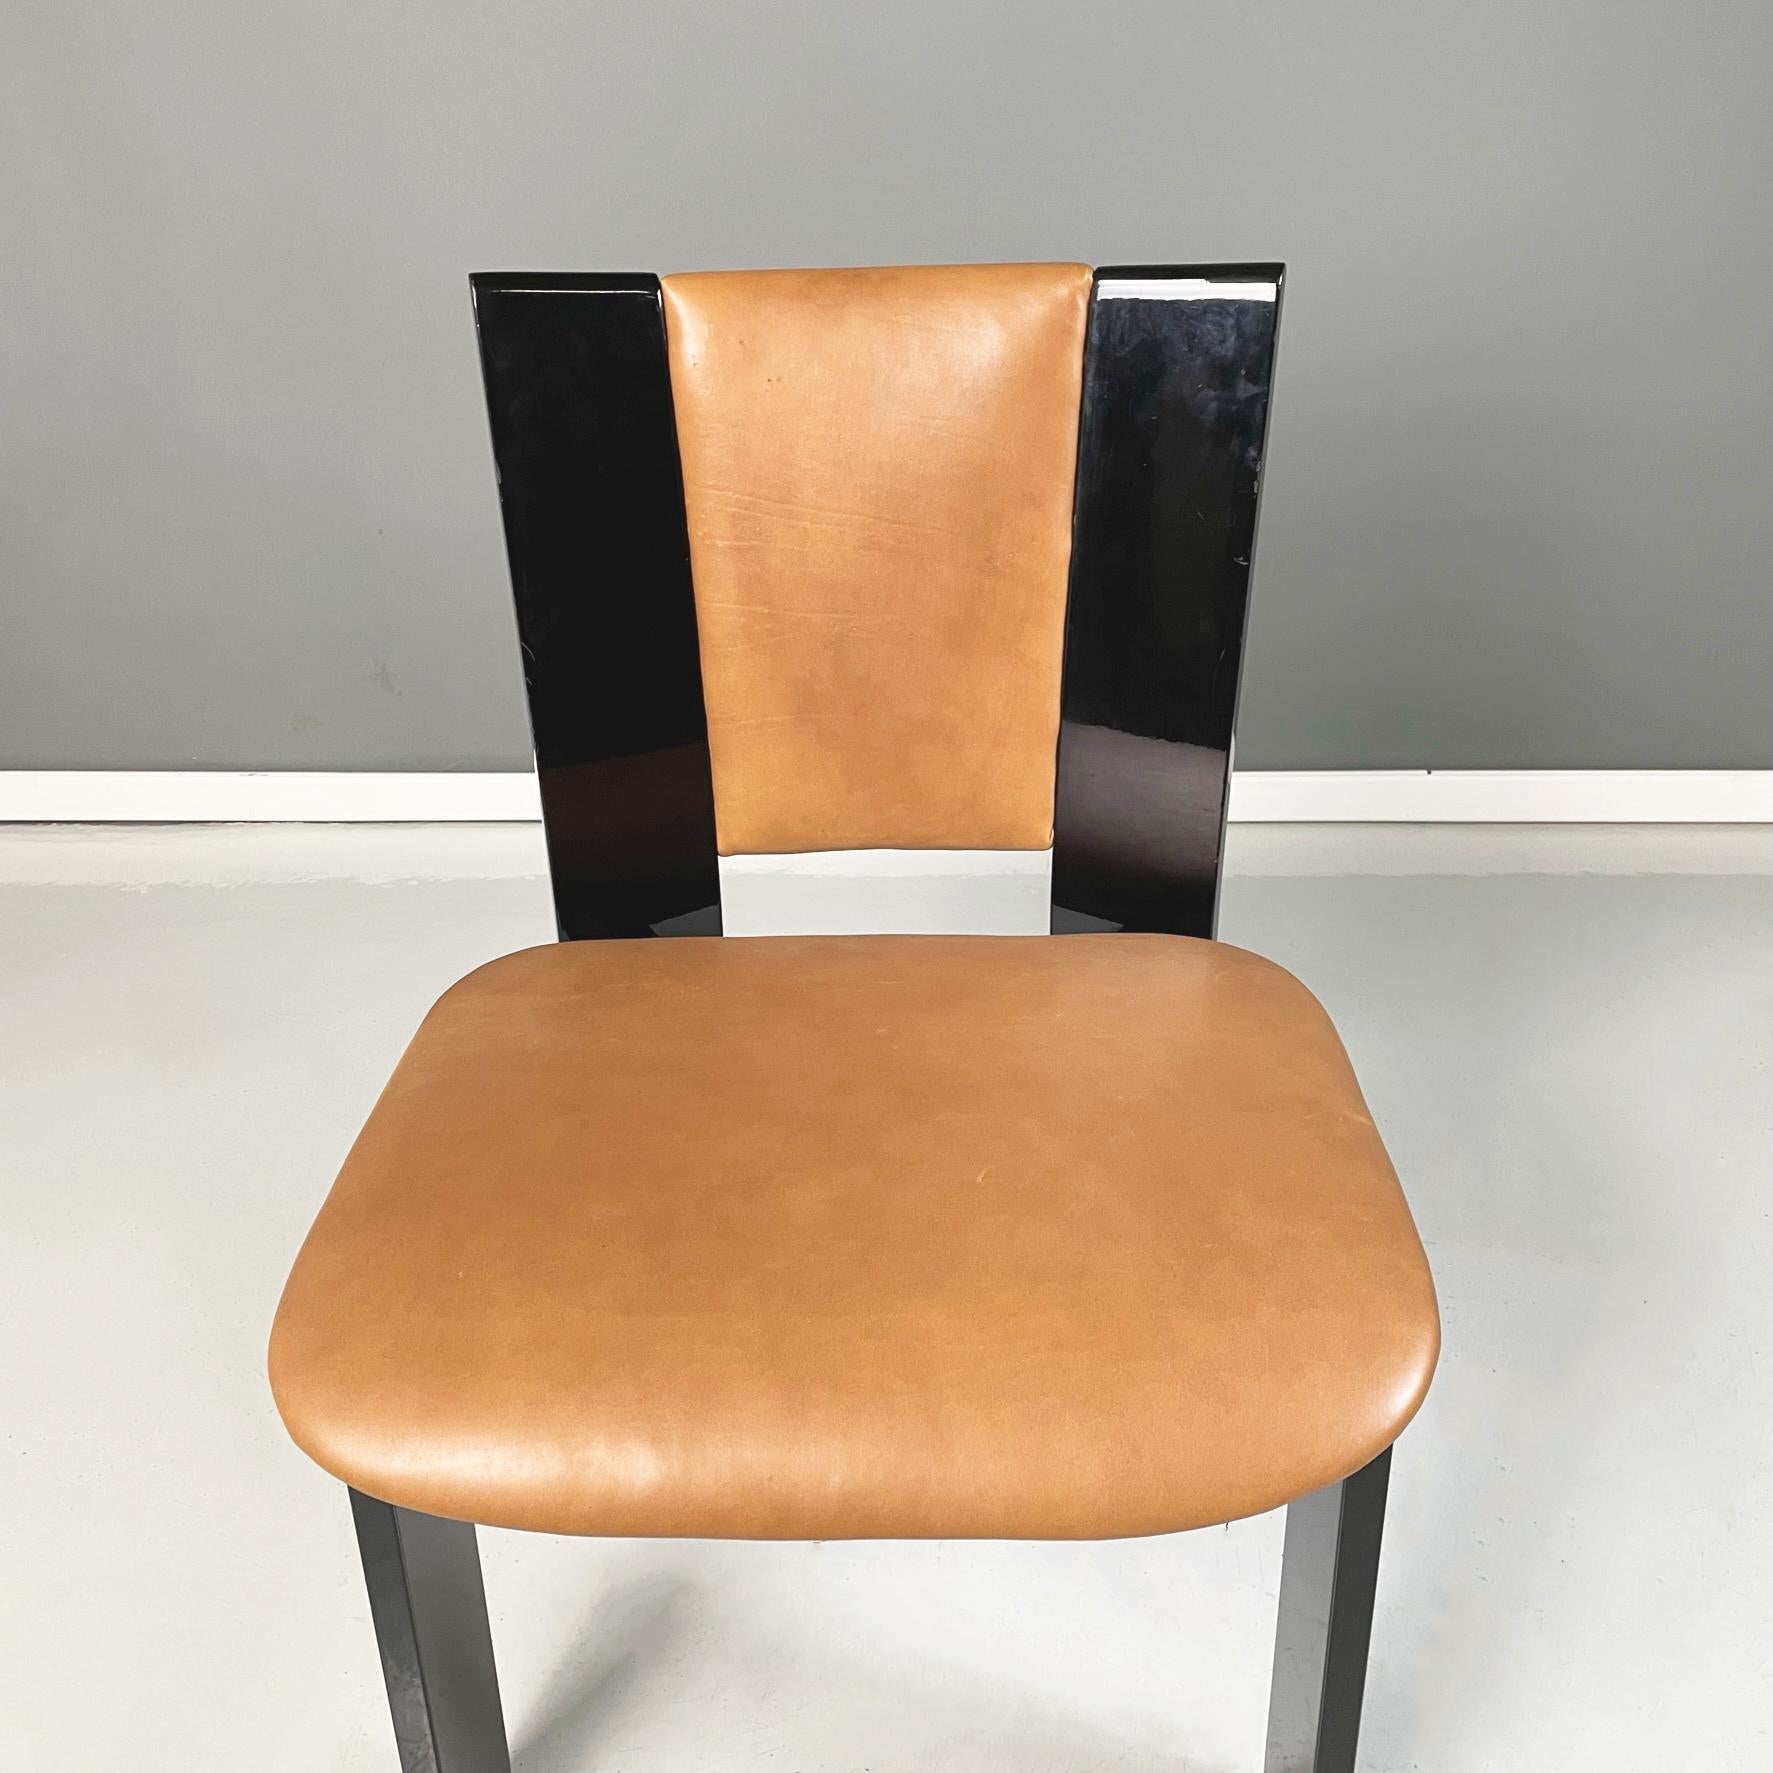 Italian Modern Black Lacquered Brown Leather Chairs Acerbis International, 1980s For Sale 3